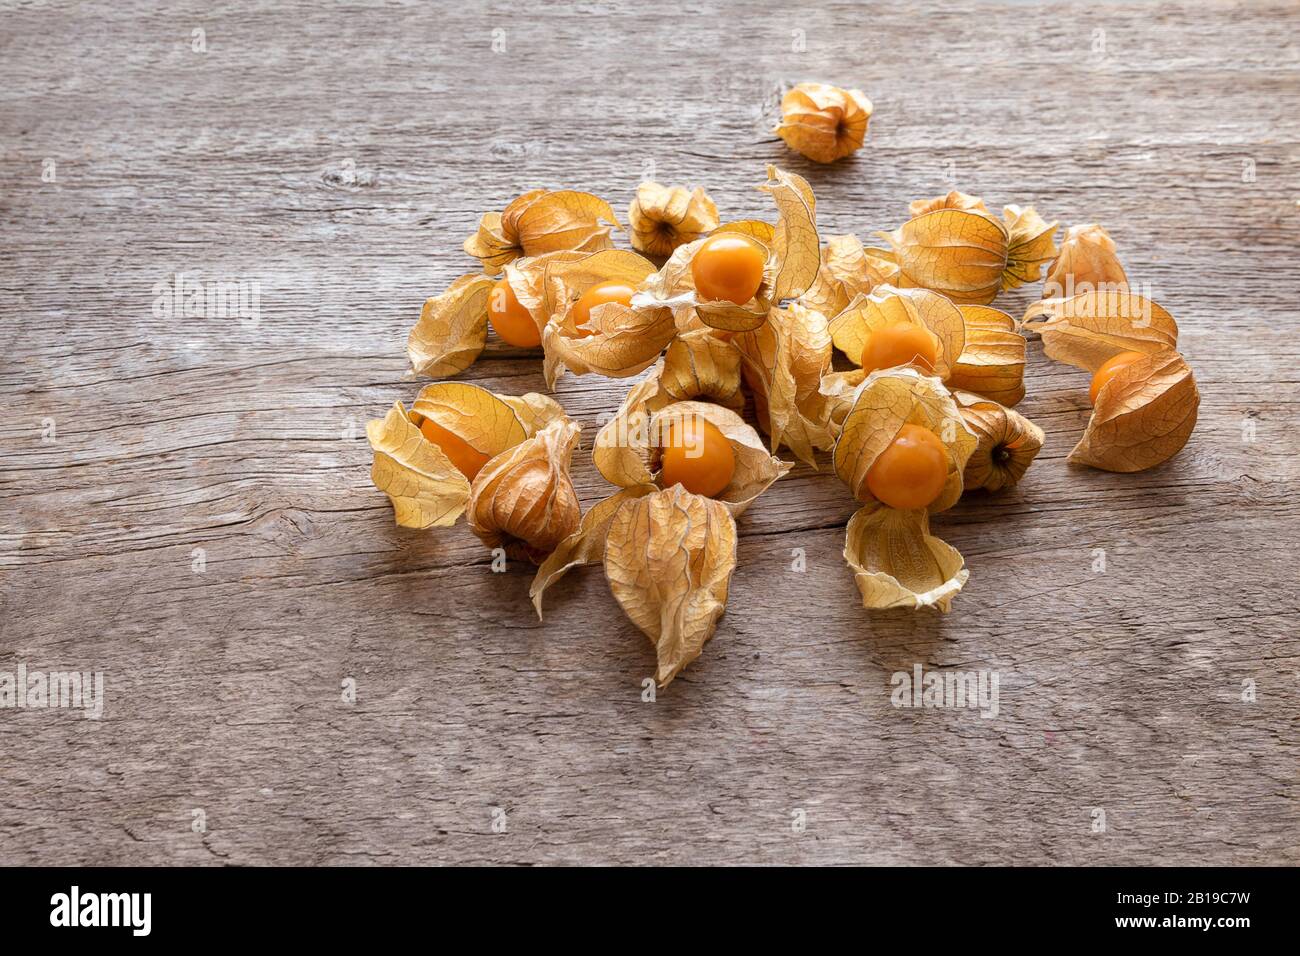 Ripe yellow physalis on wooden background, close up Stock Photo